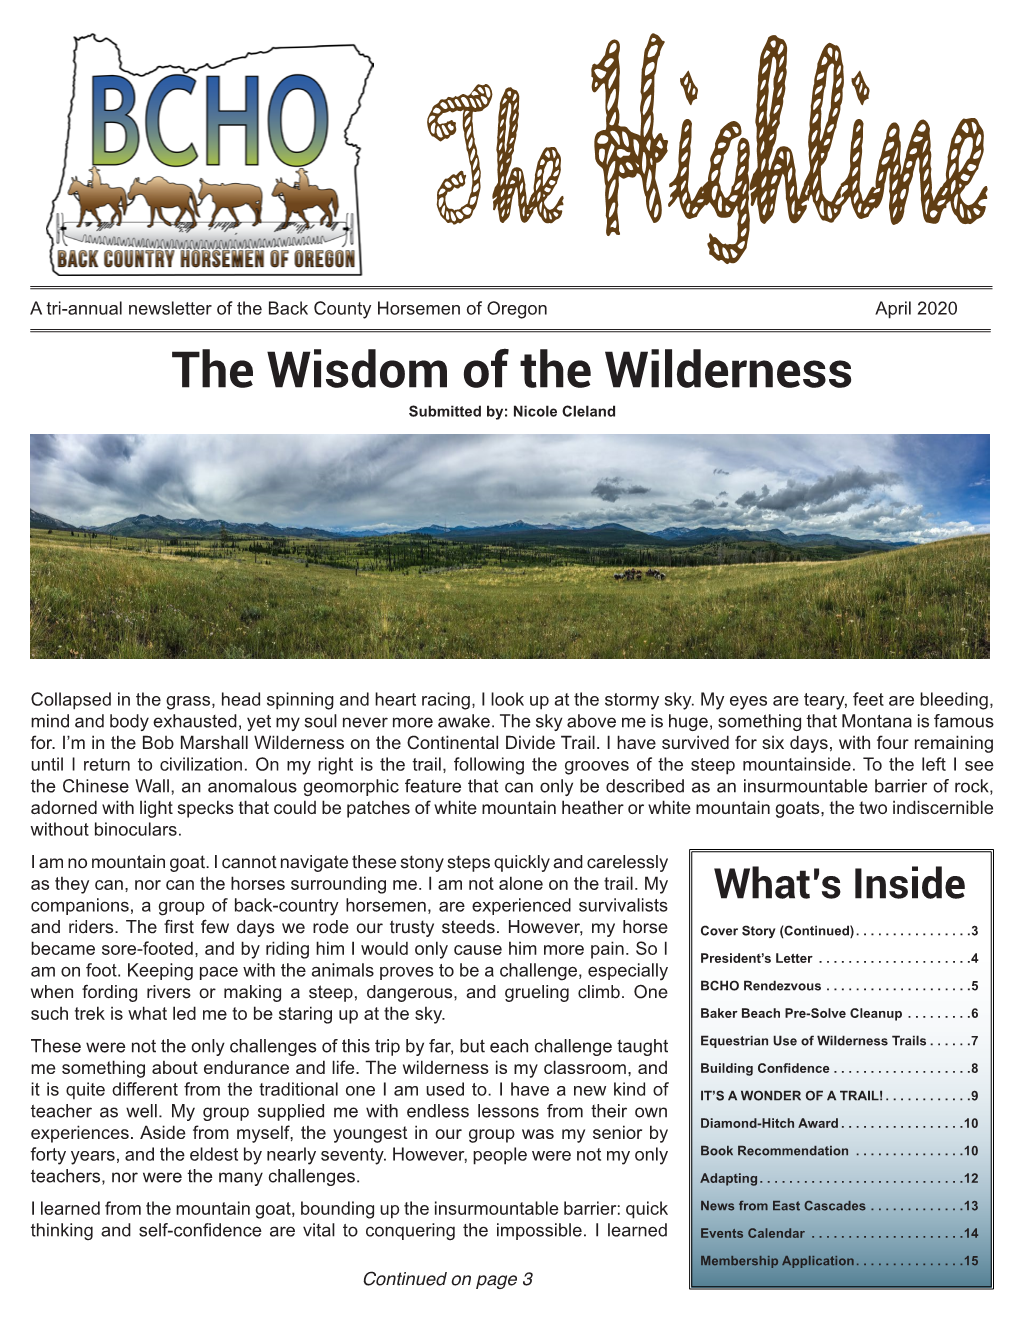 The Wisdom of the Wilderness Submitted By: Nicole Cleland